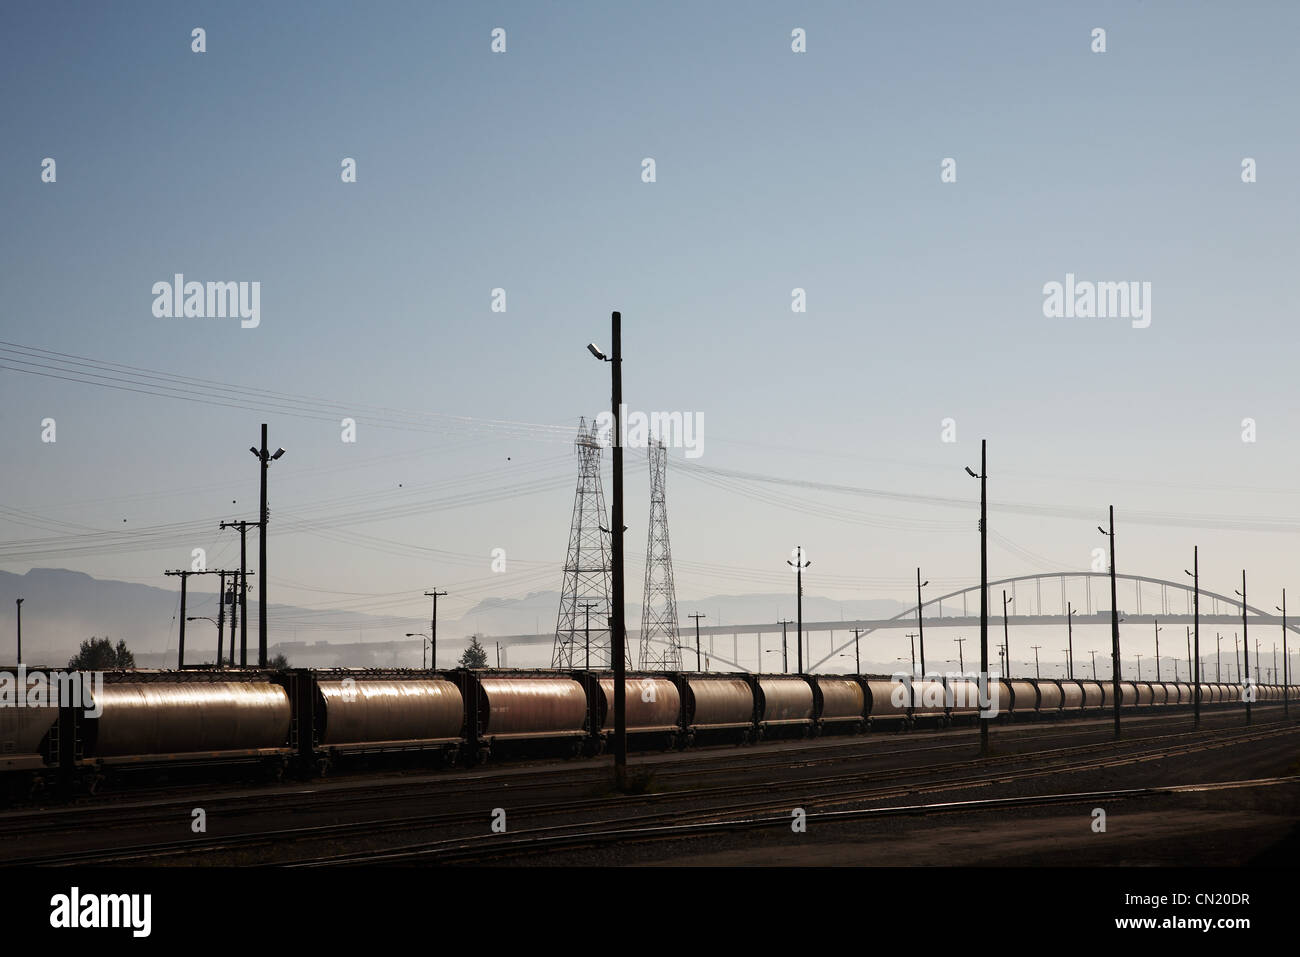 Train tankers and electricity pylons, Canada Stock Photo